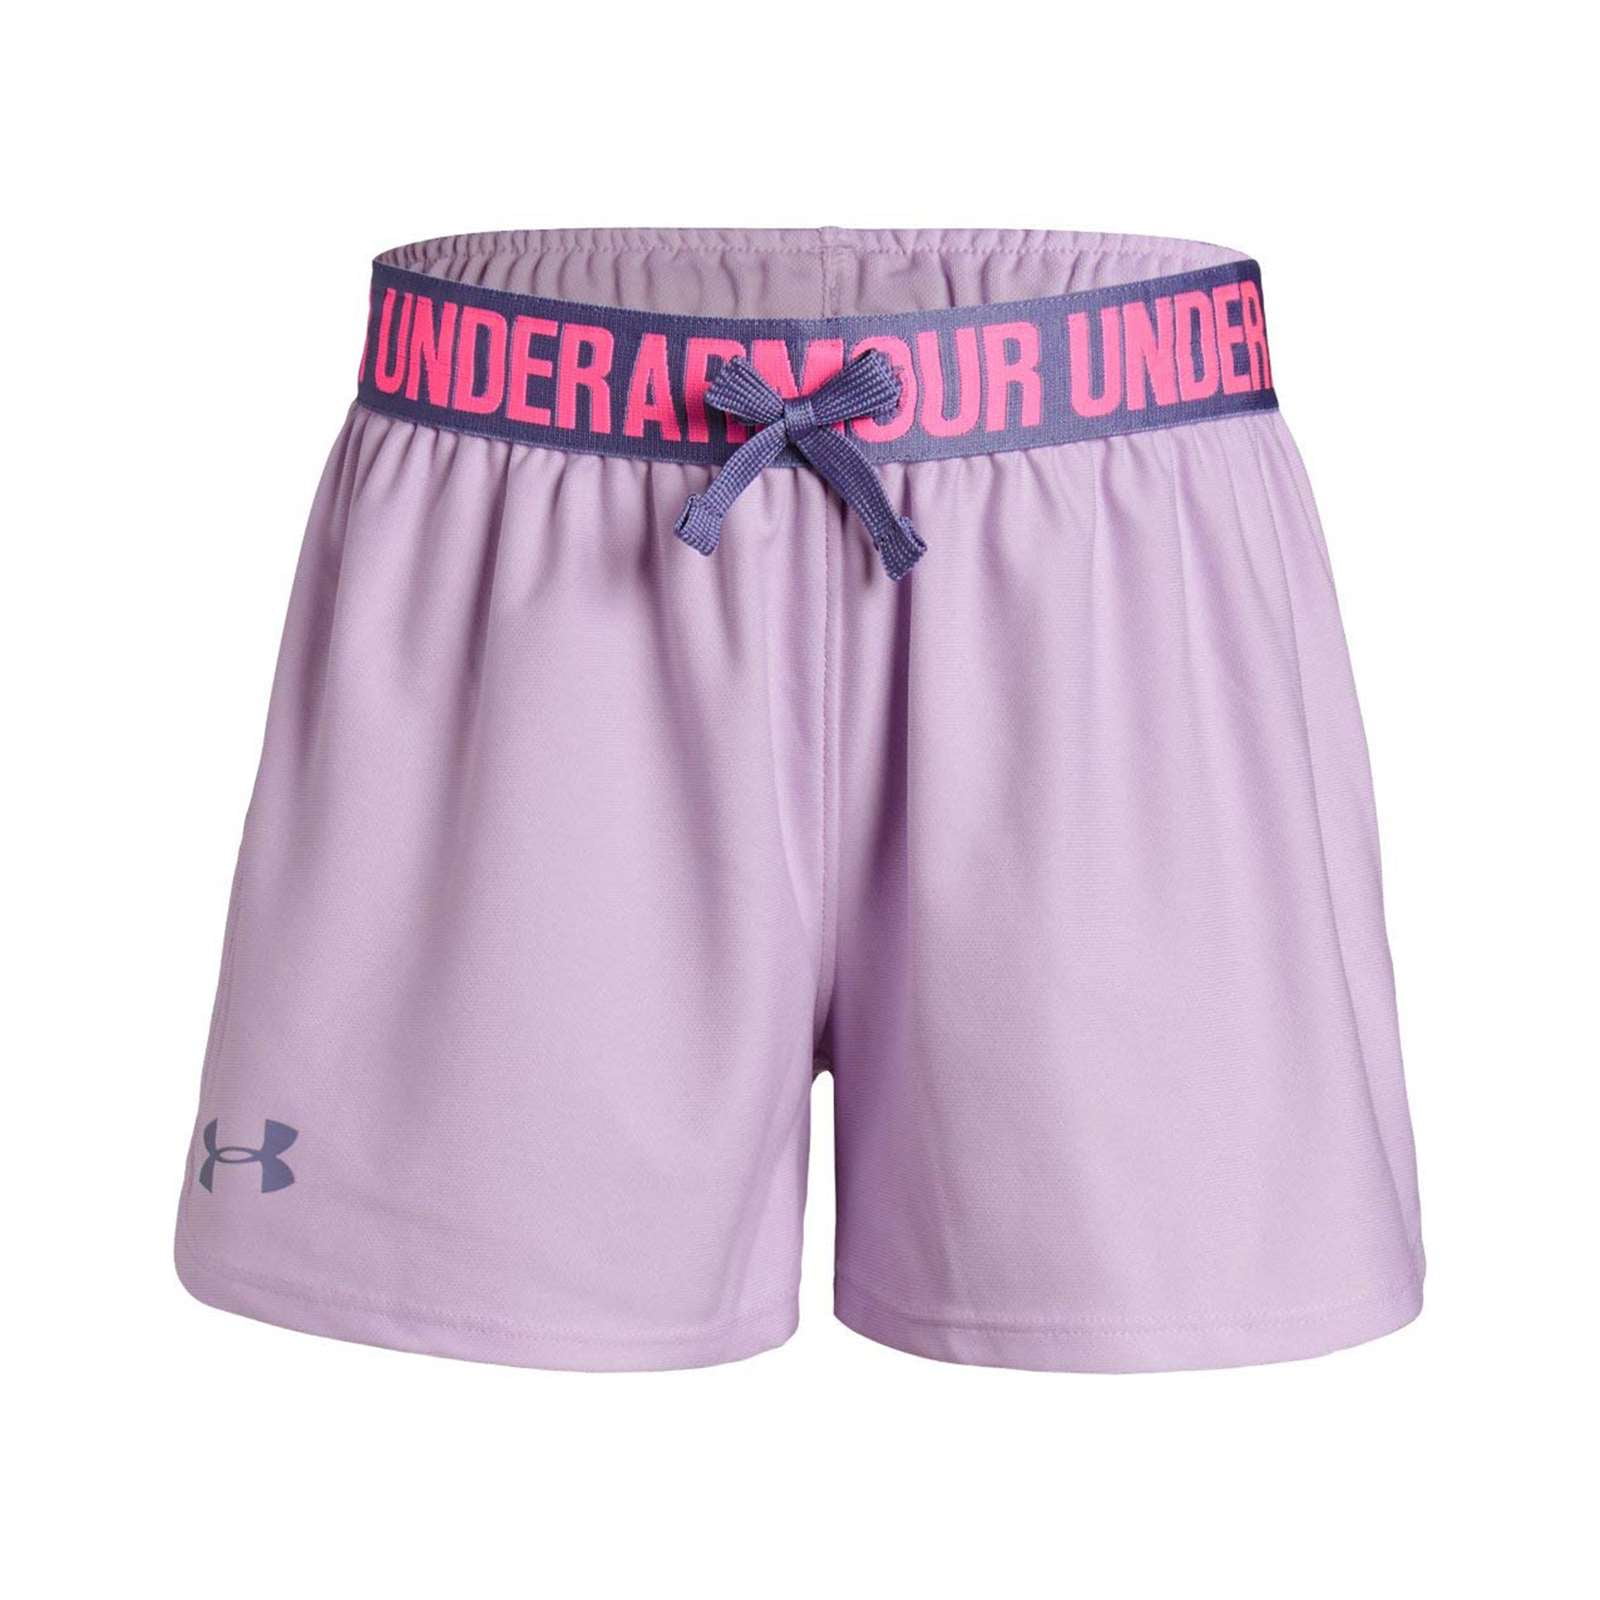 Under Armour Girls Play Up Shorts, Purple Ace \ Pink,XL - US 